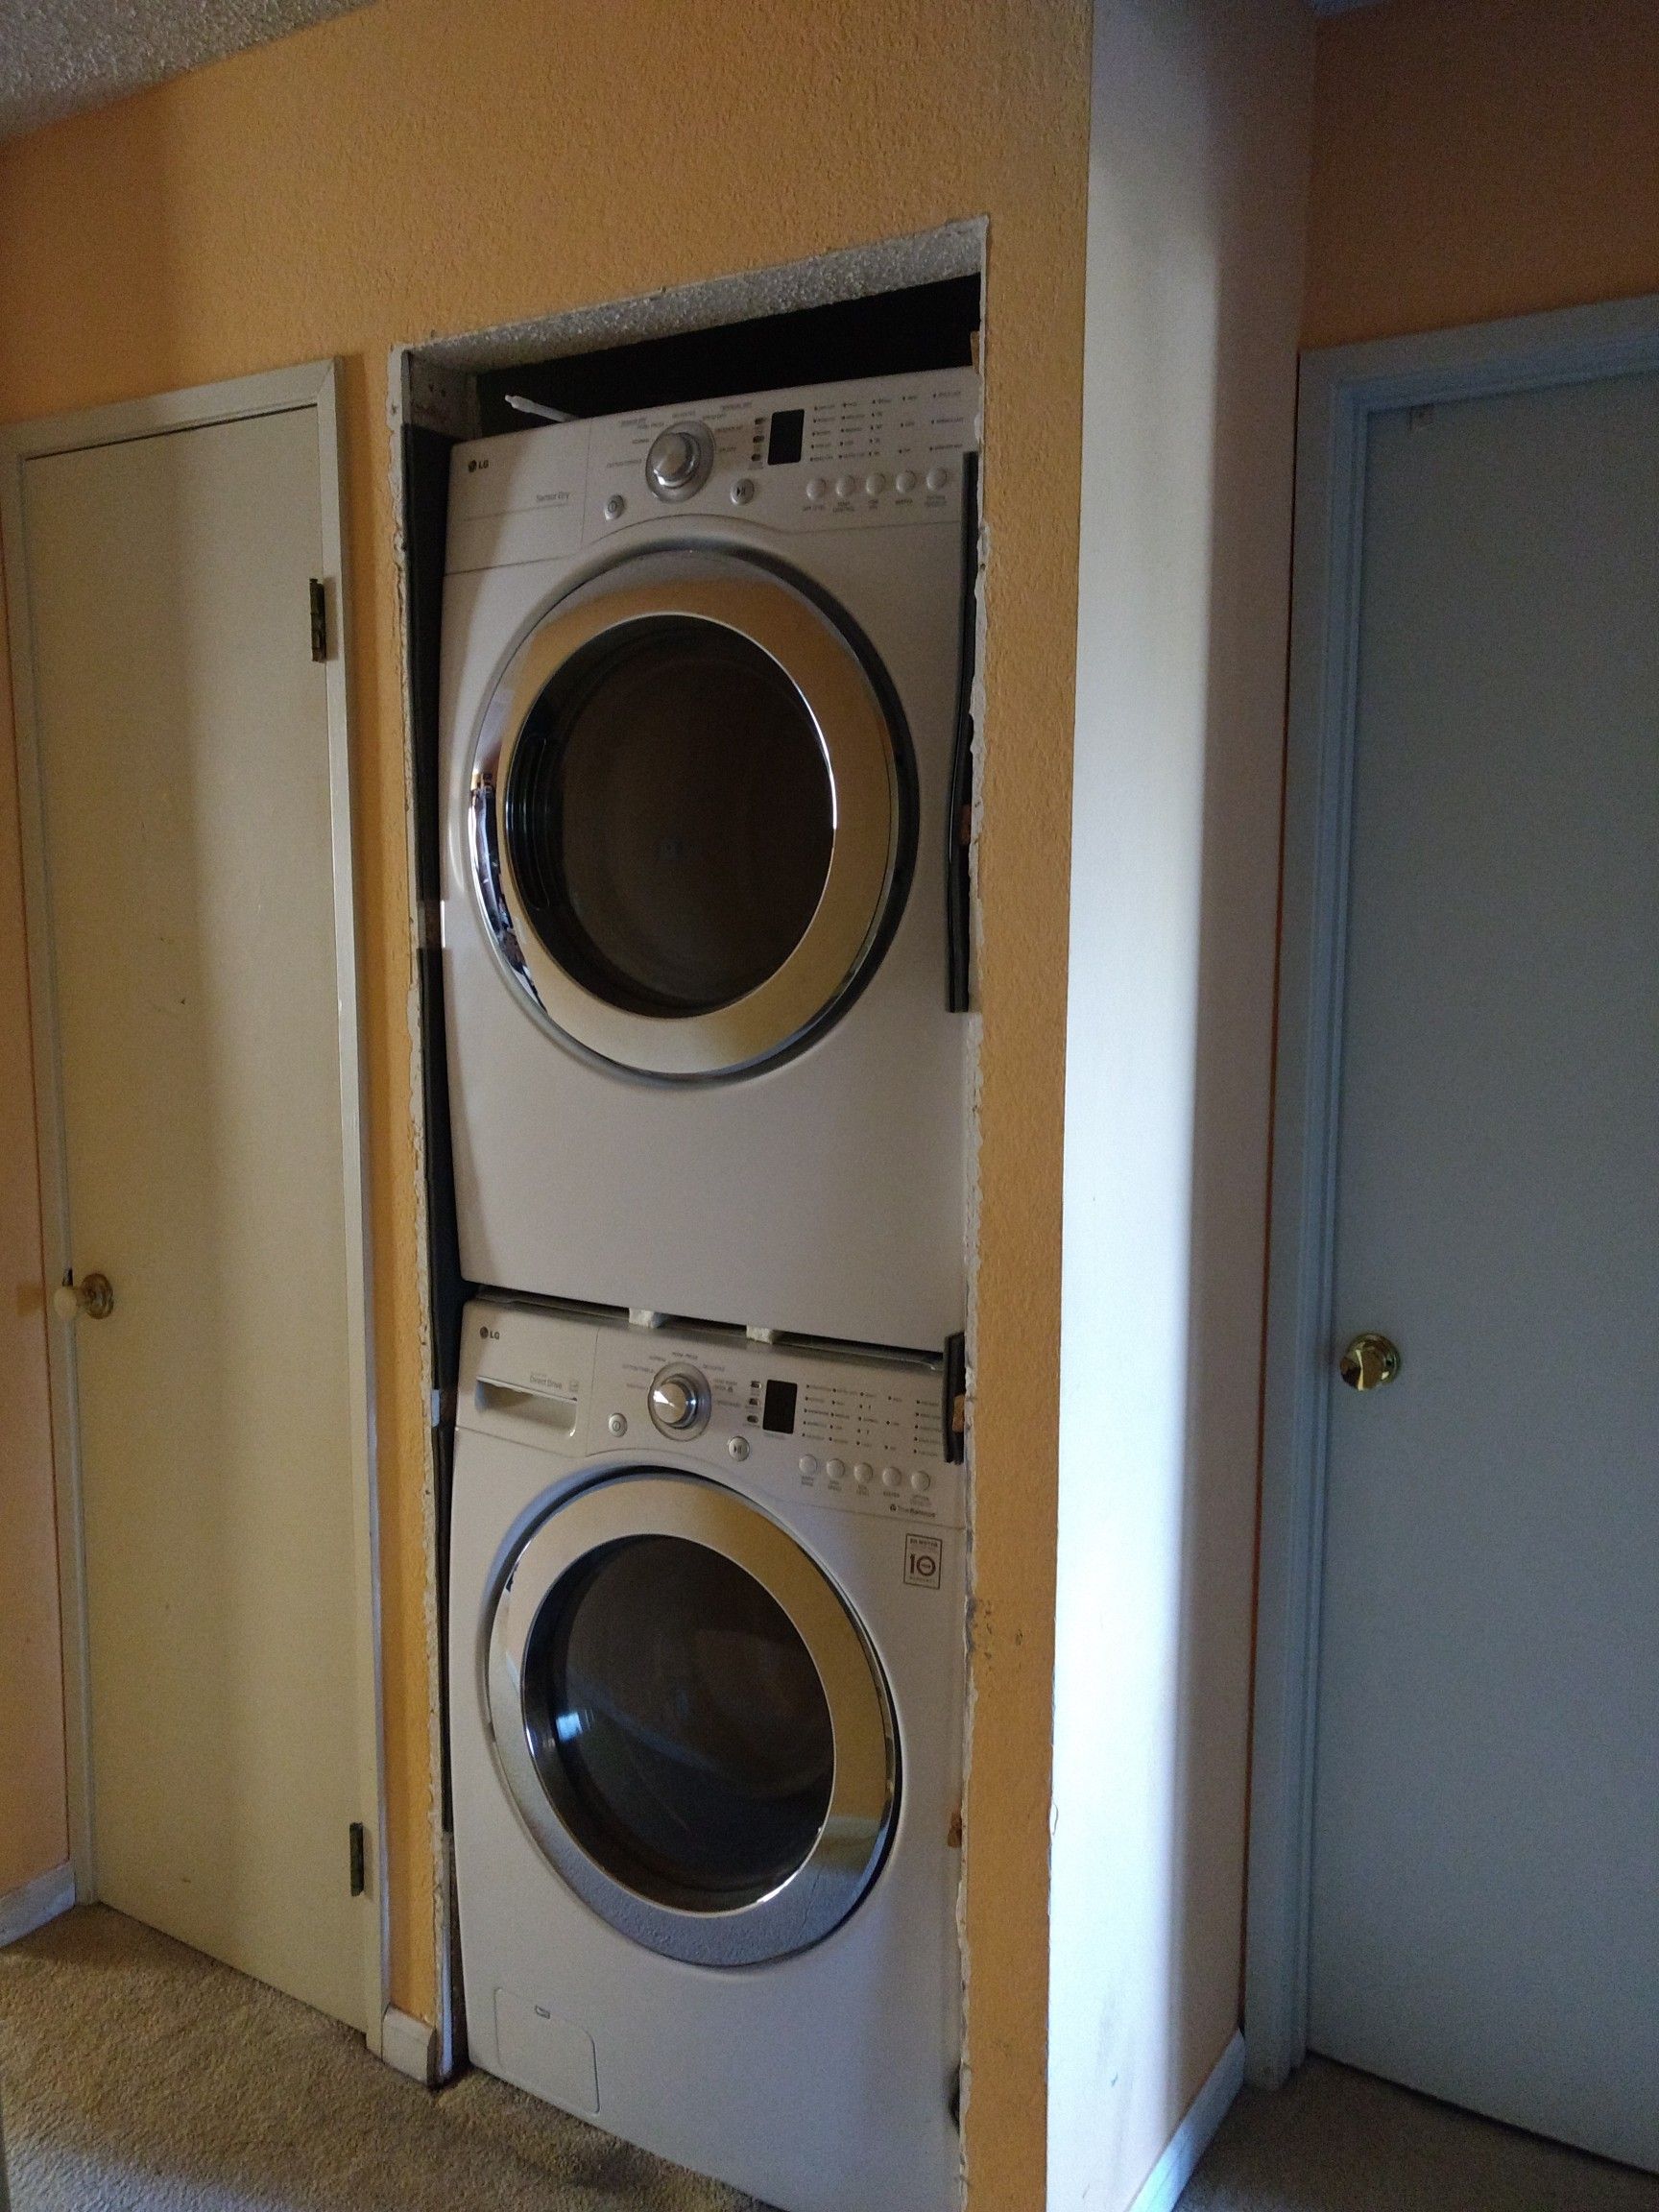 LG dryer and washer